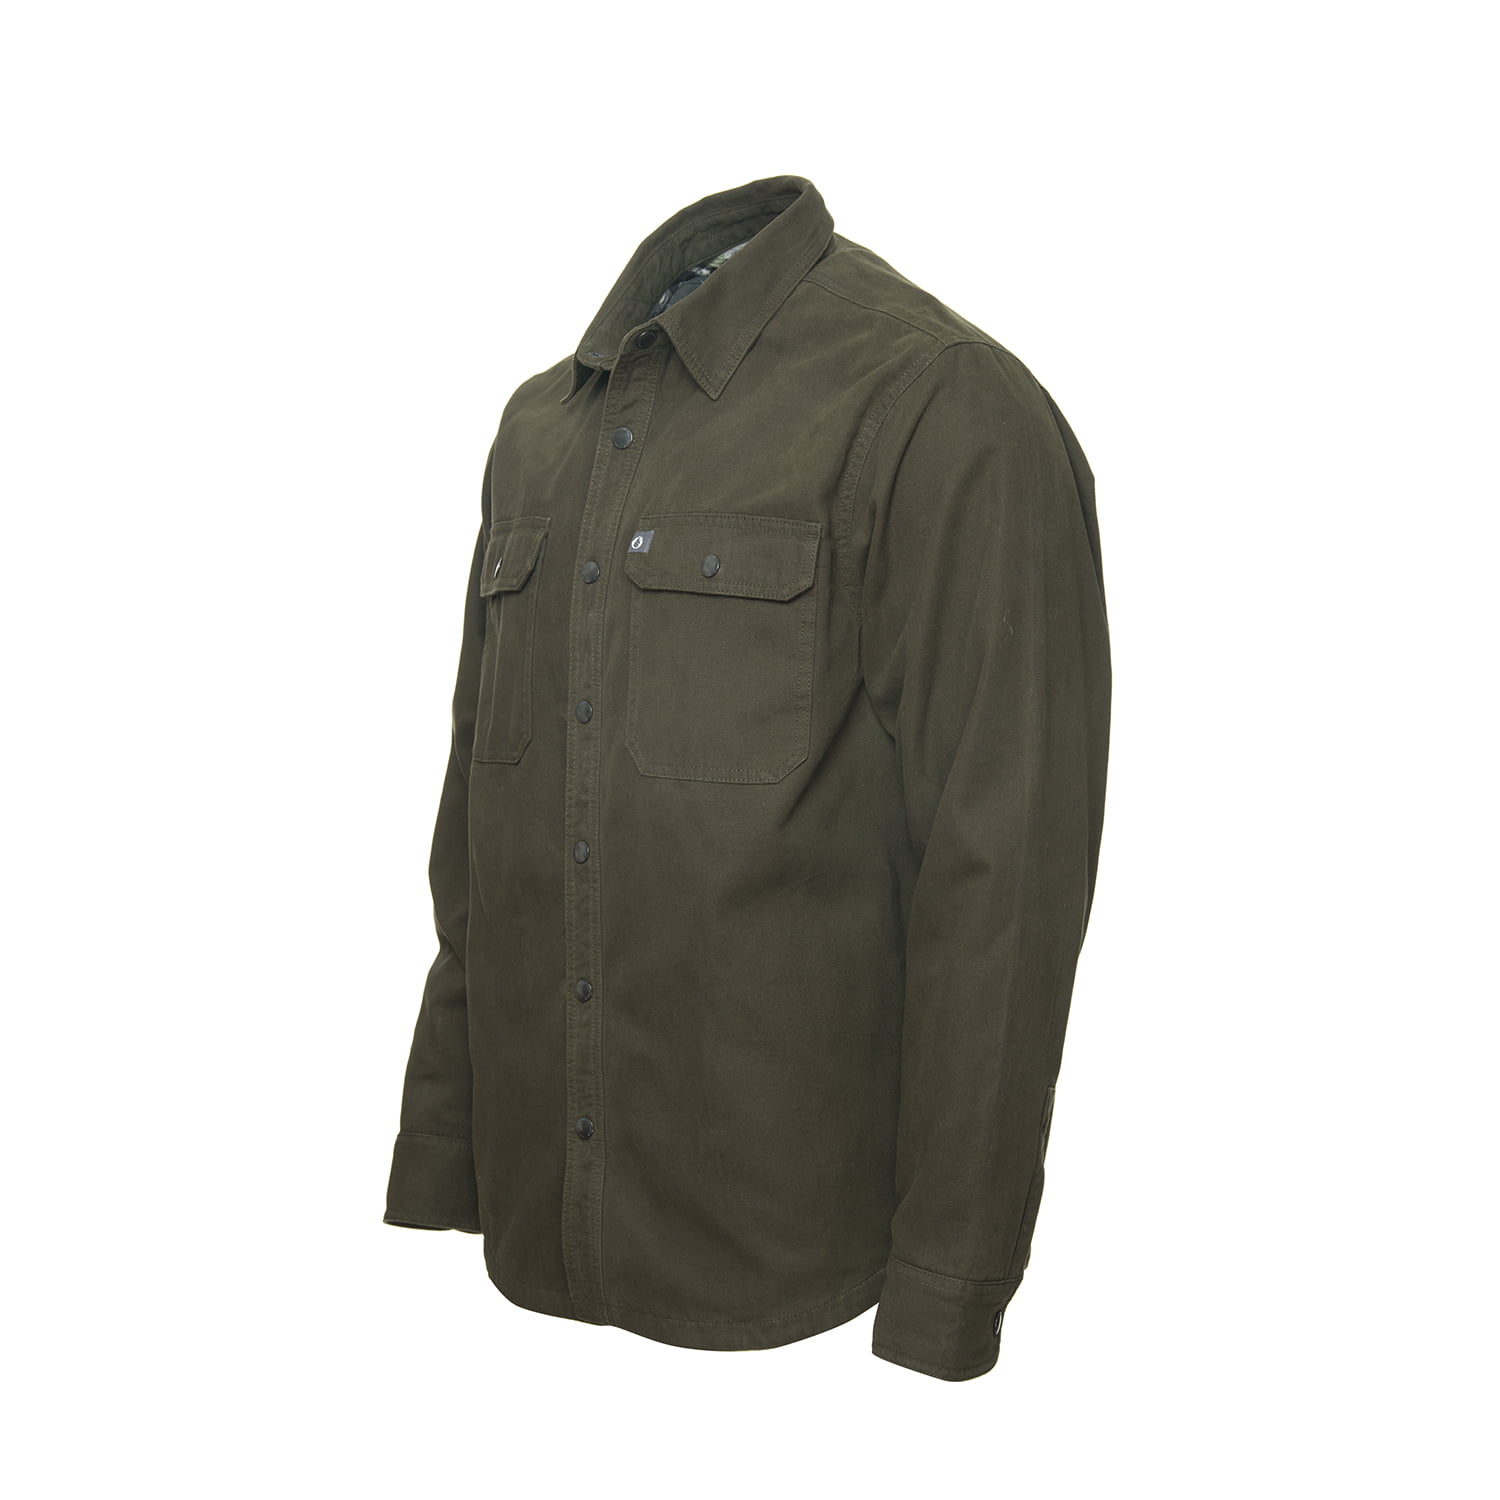 The American Outdoorsman Fleece Lined Washed Canvas Shirt Jackets (Large,  Olive) - Walmart.com